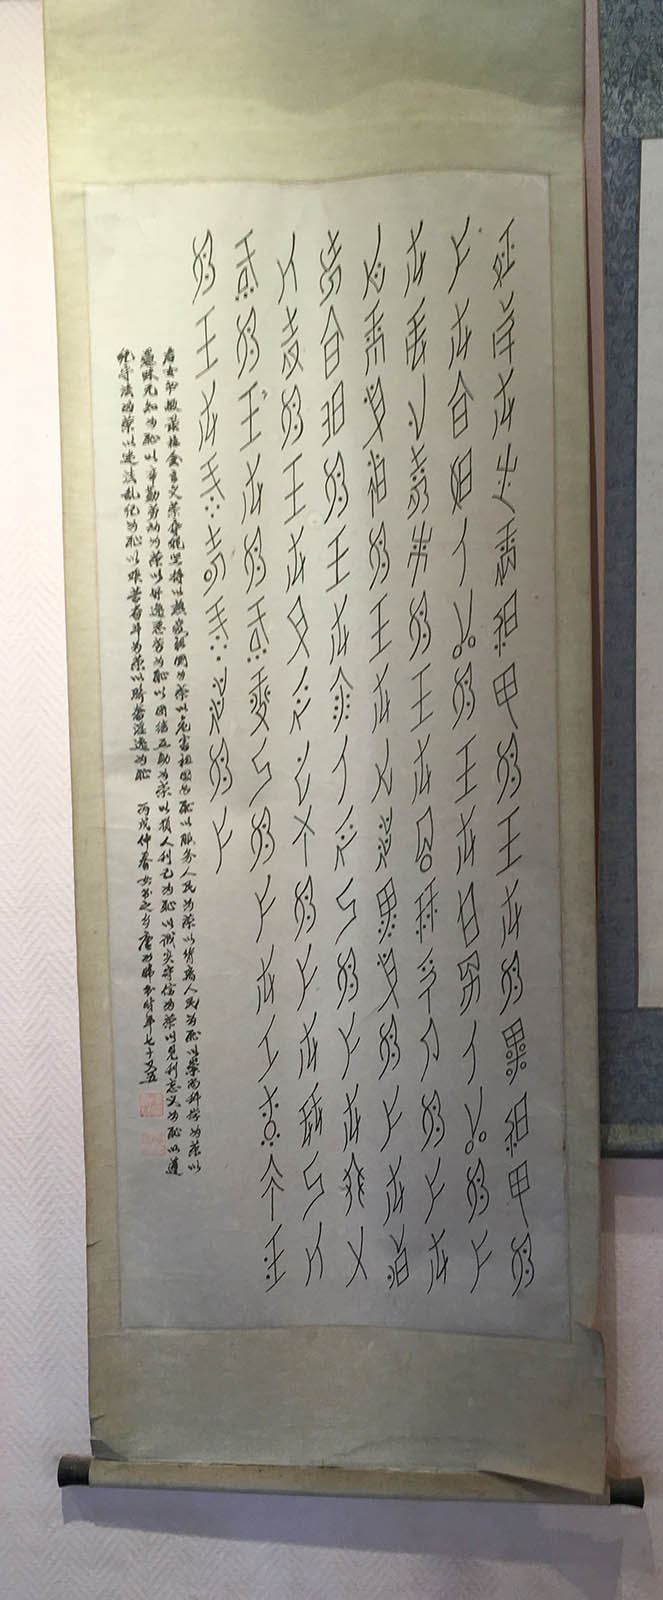 Nüshu calligraphy on a vertical scroll by male calligrapher